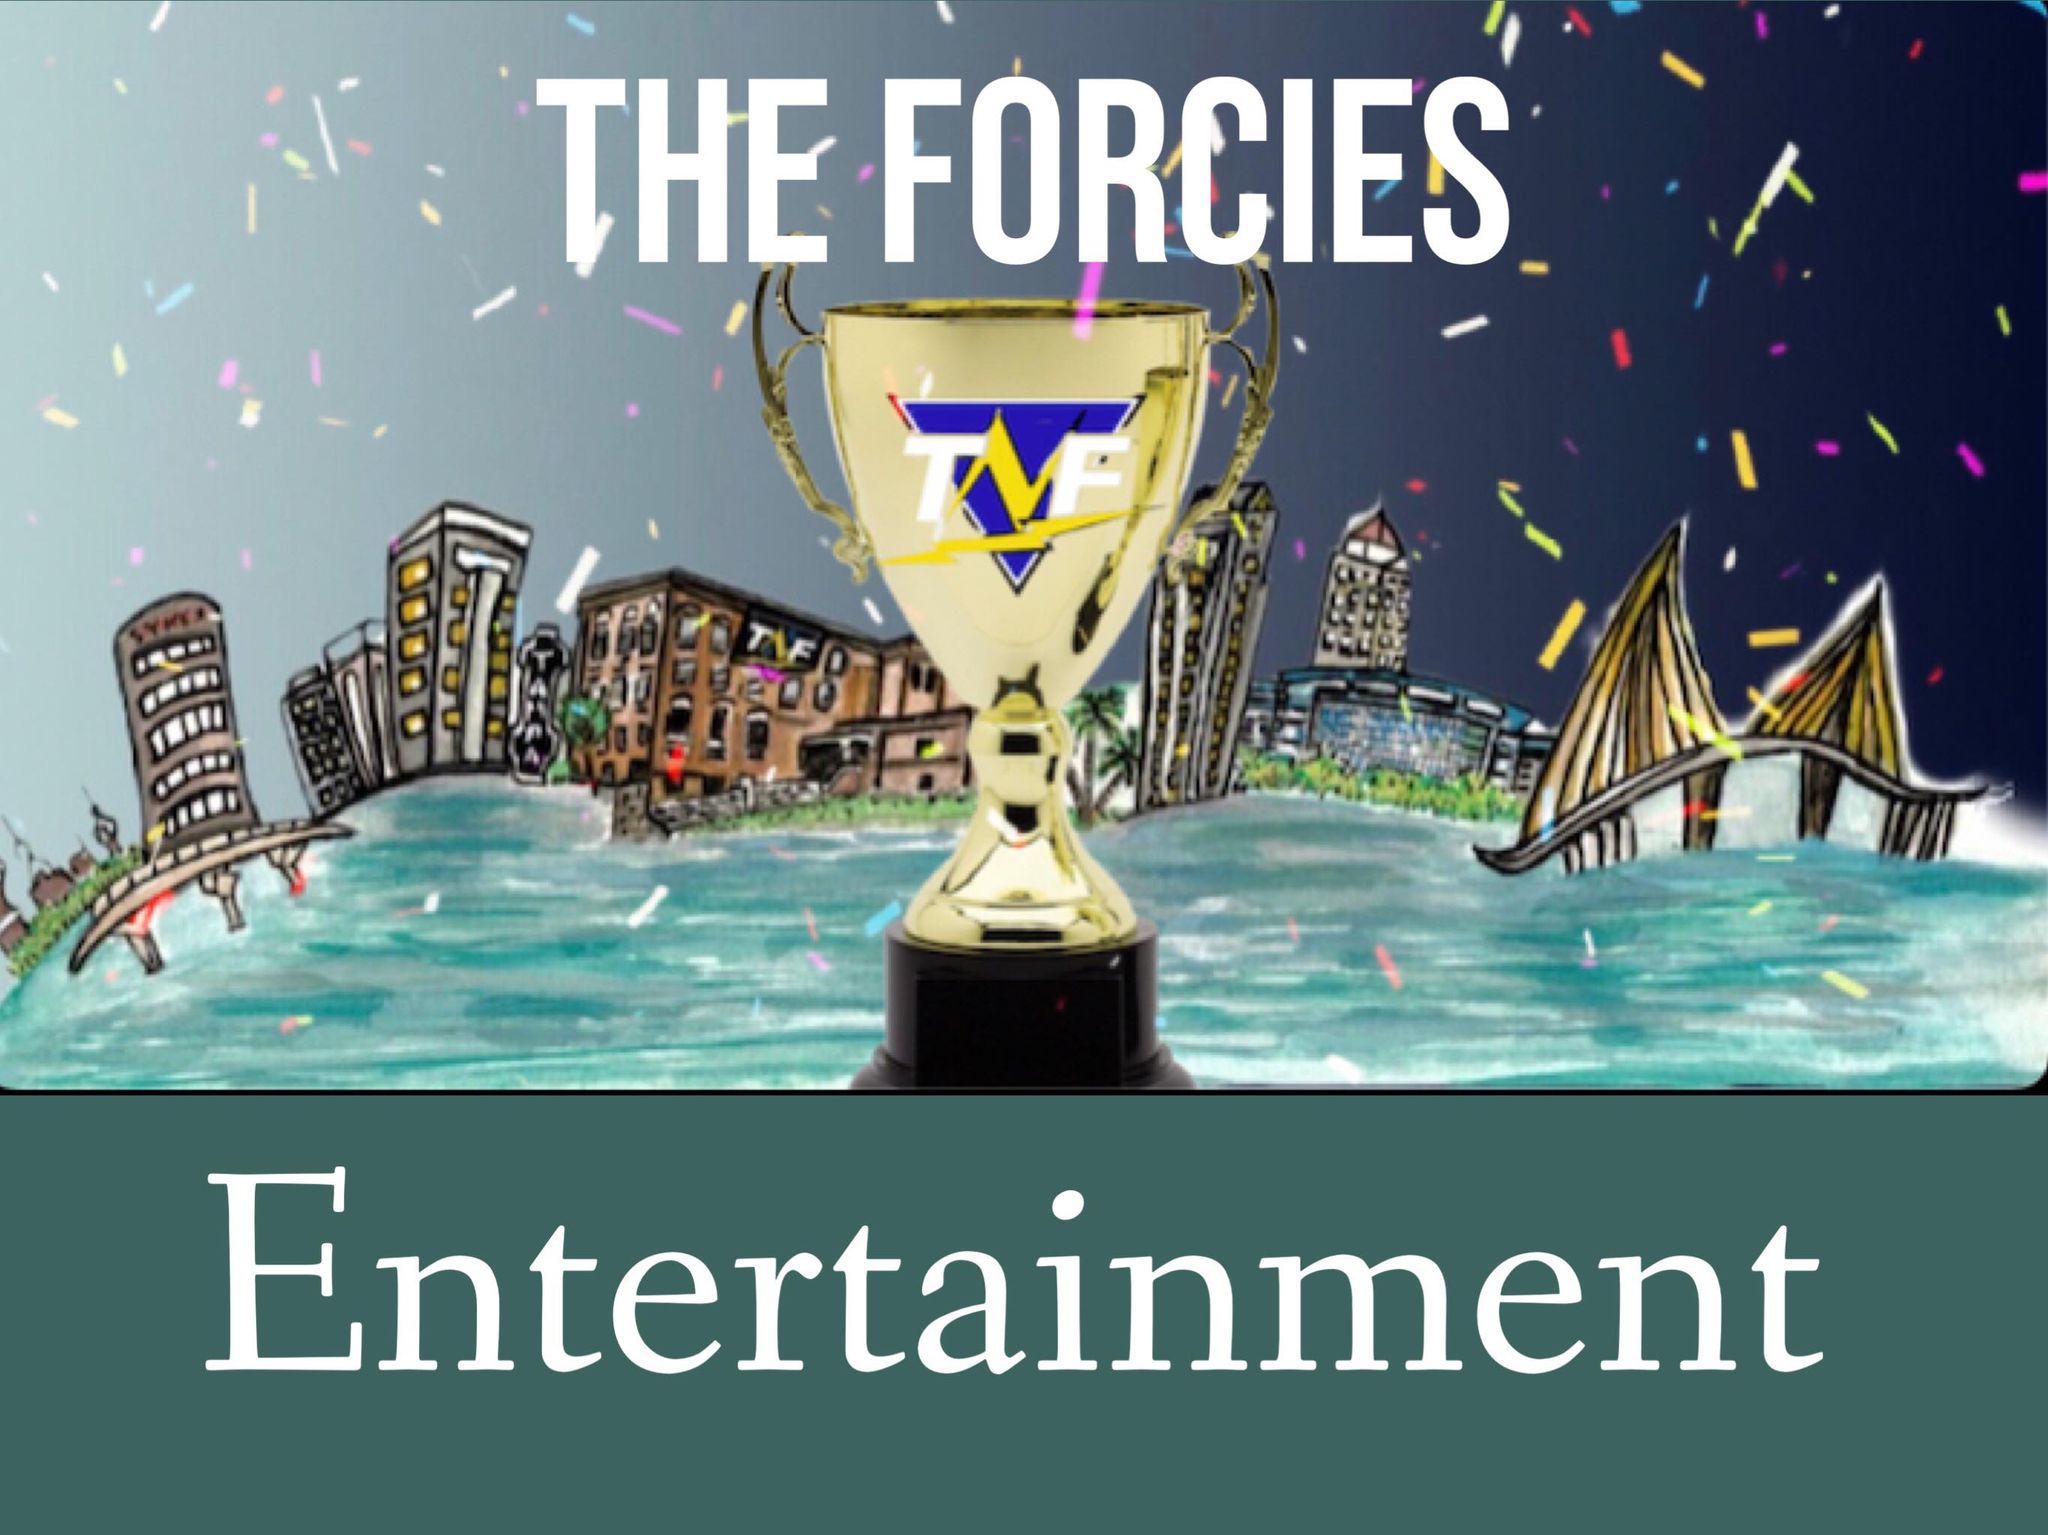 Day four of voting for The Forcies Tampa News Force's Better Than The